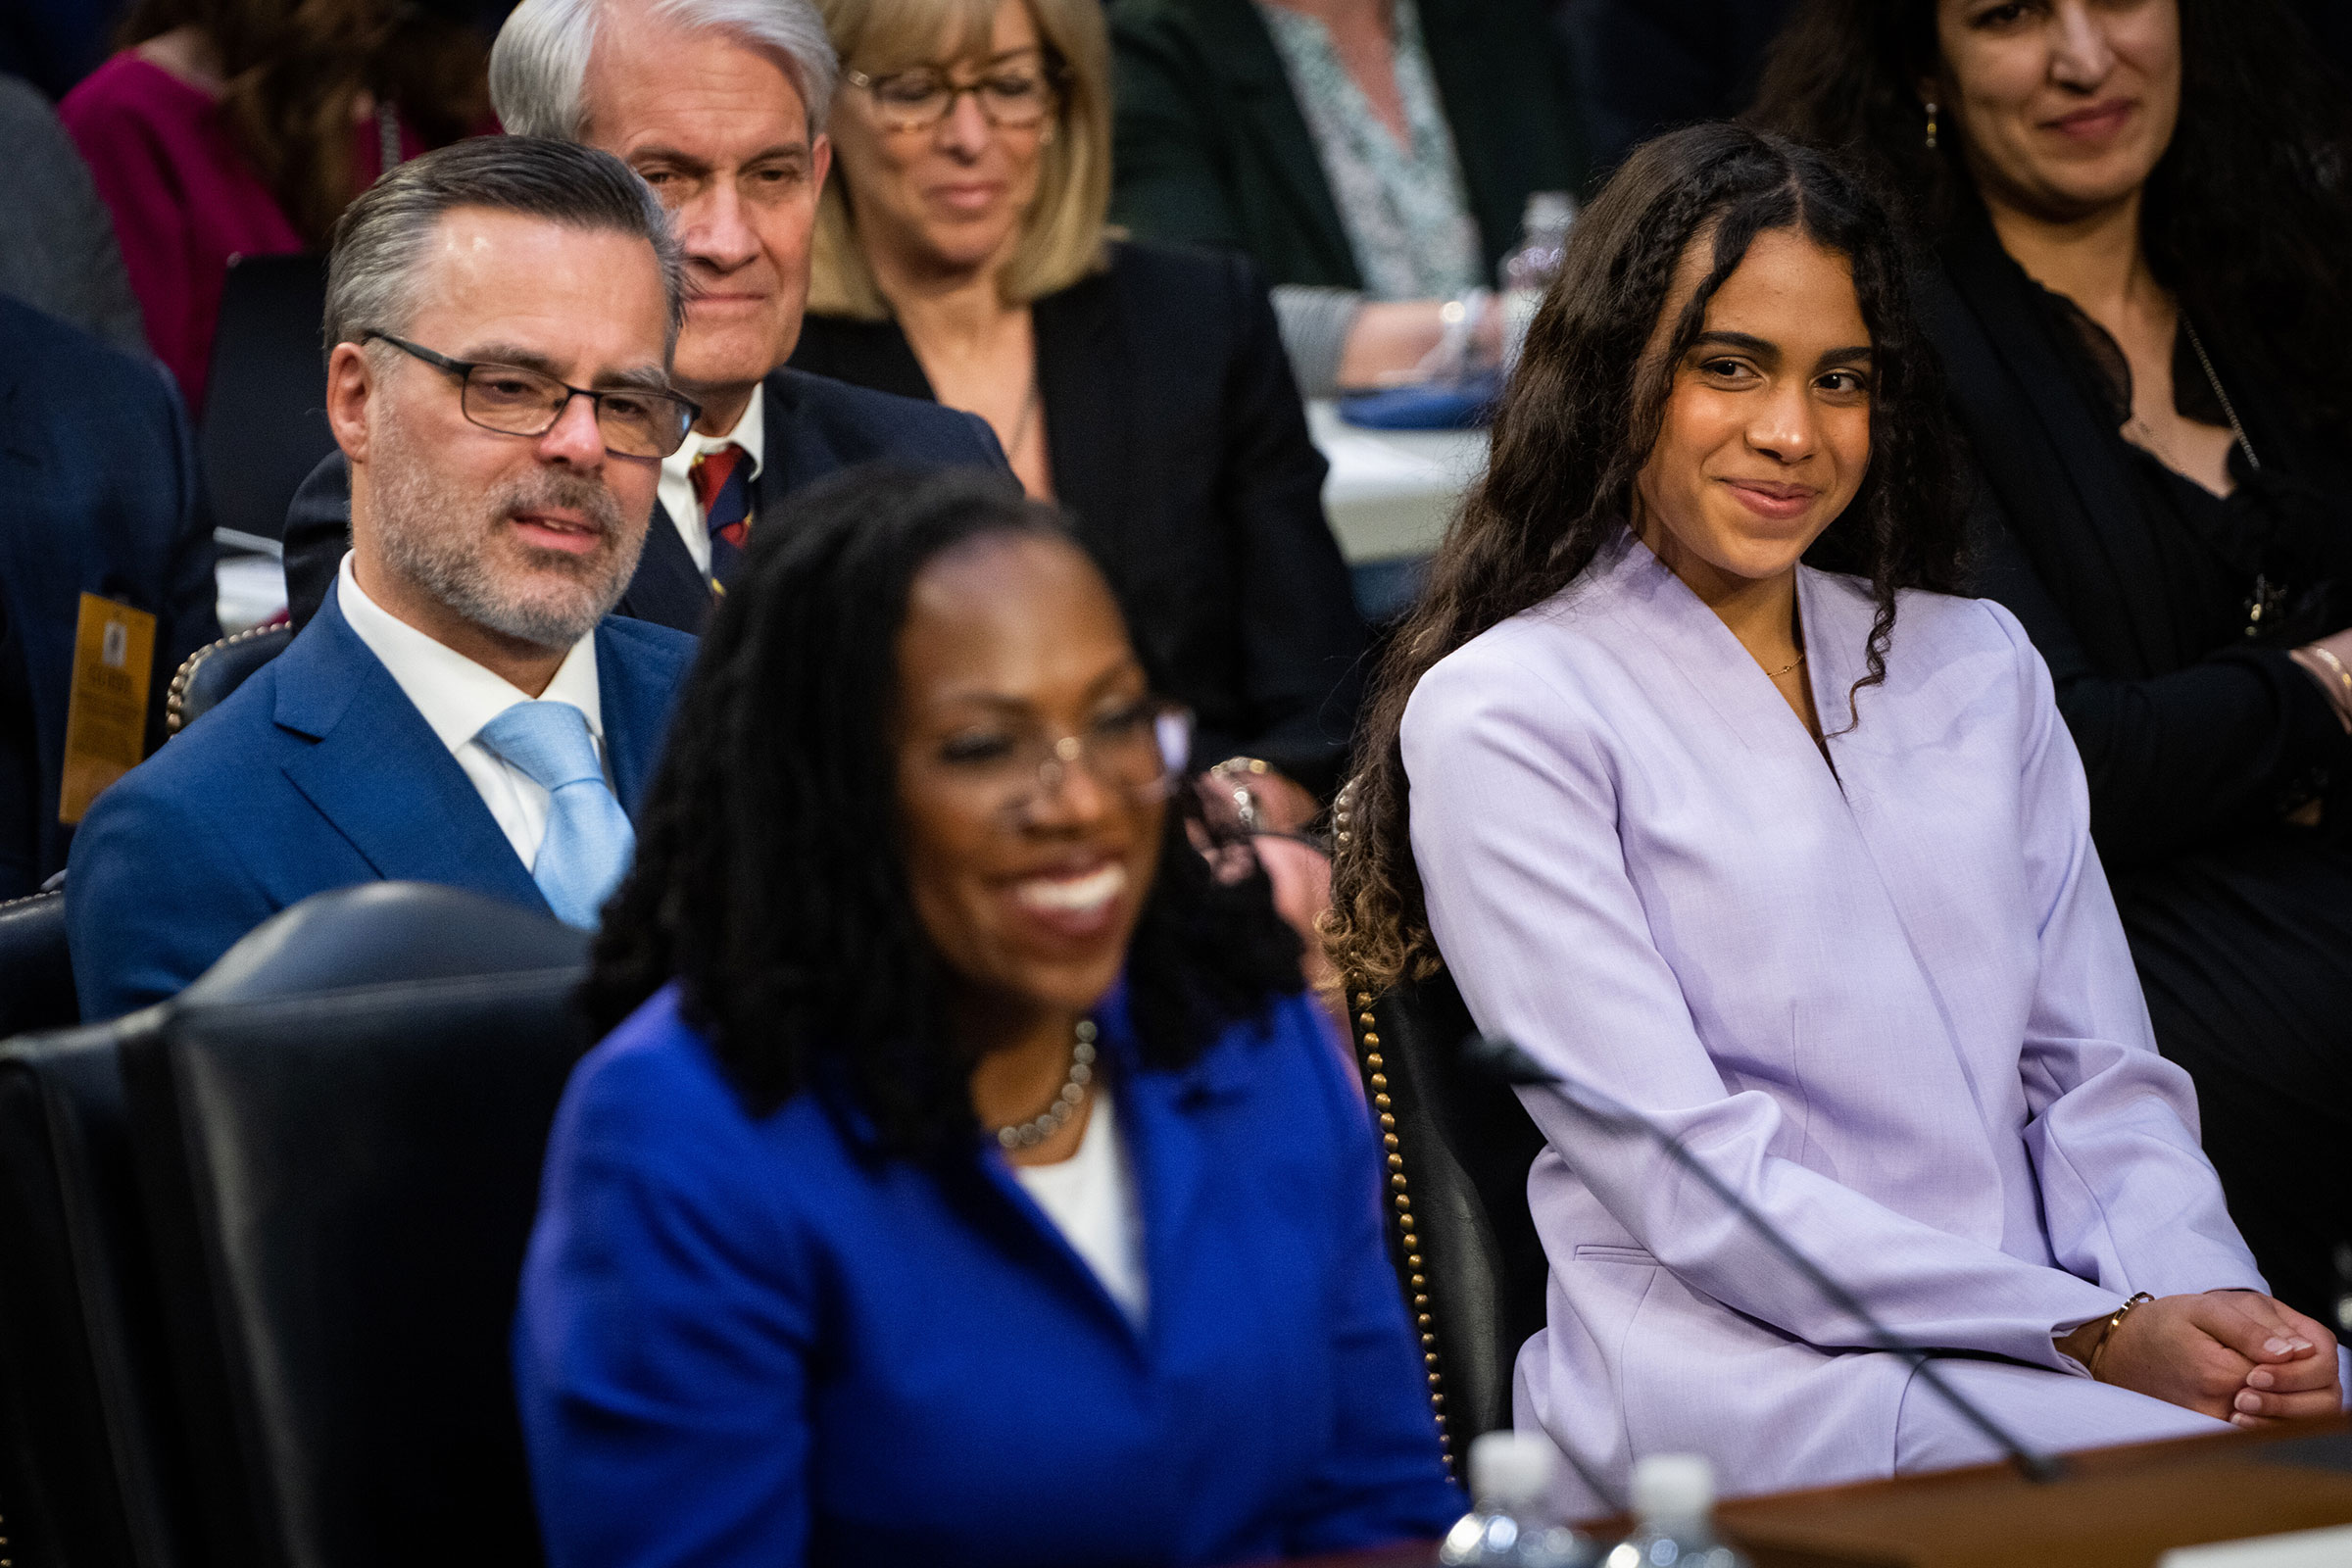 Patrick Jackson, left, husband of Supreme Court nominee Ketanji Brown Jackson, center, and daughter Leila Jackson, right, look on during confirmation hearings in Washington, on March 21.